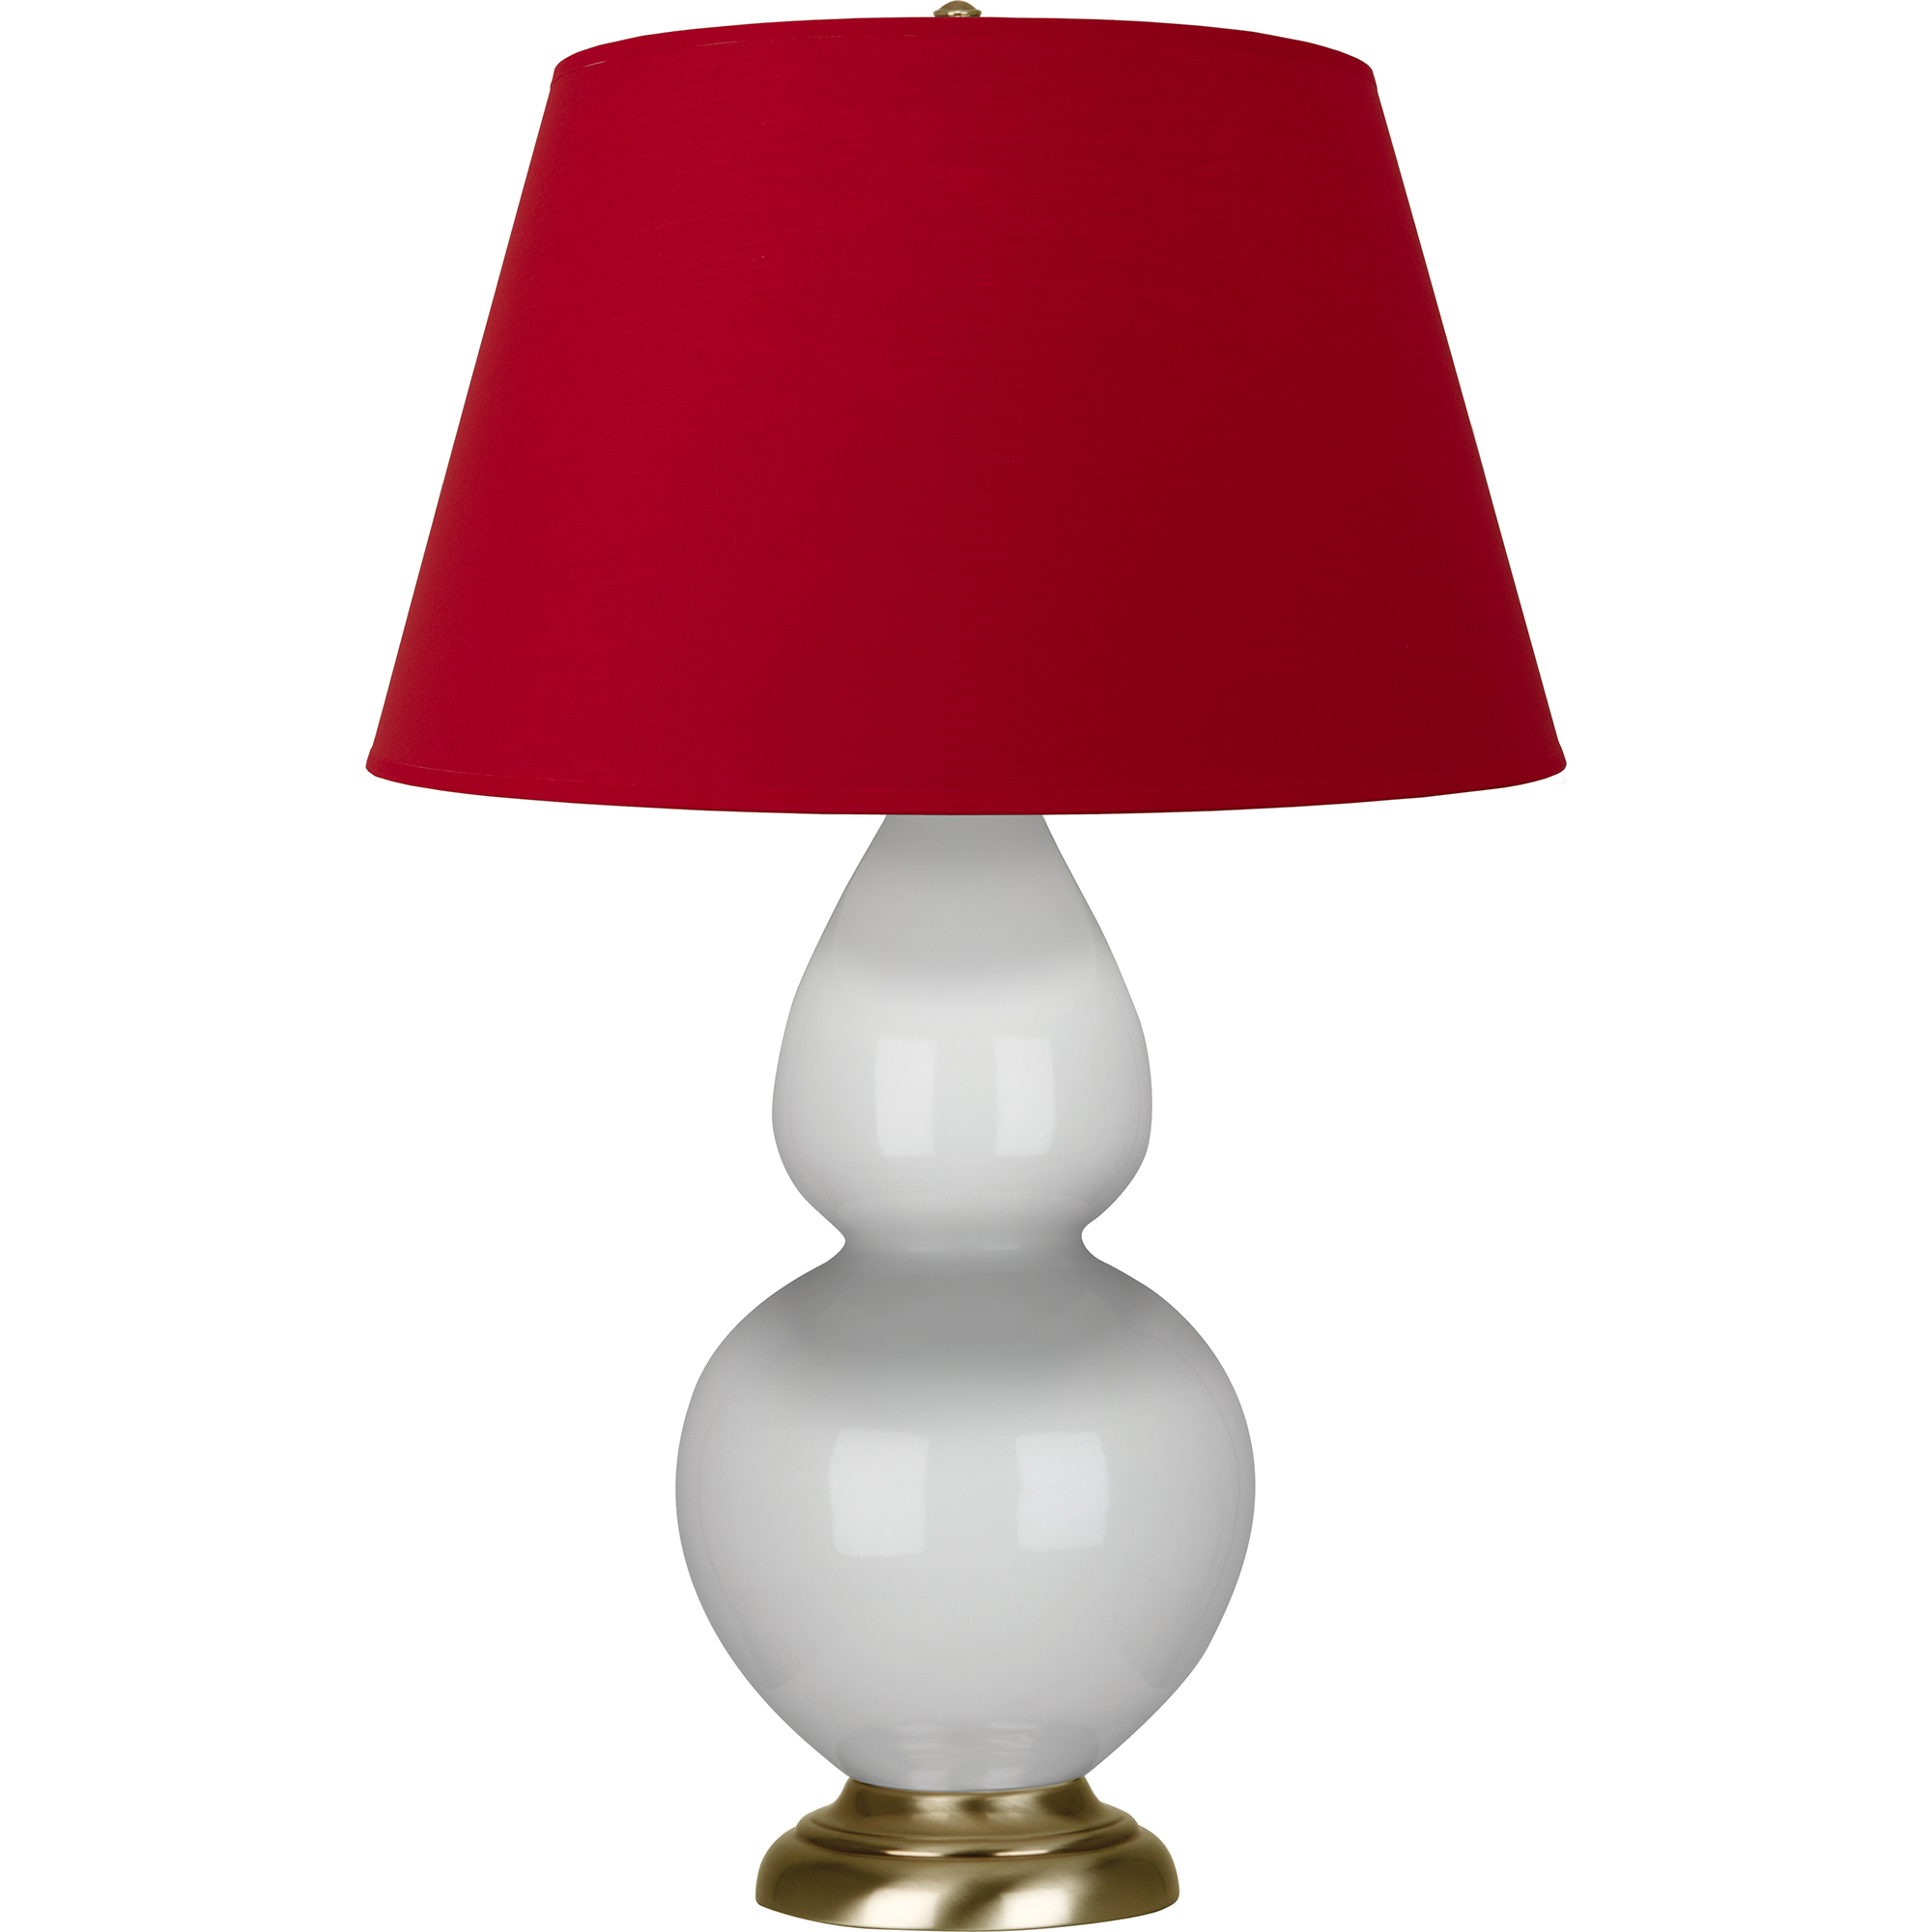 Double Gourd Table Lamp Style #1660R